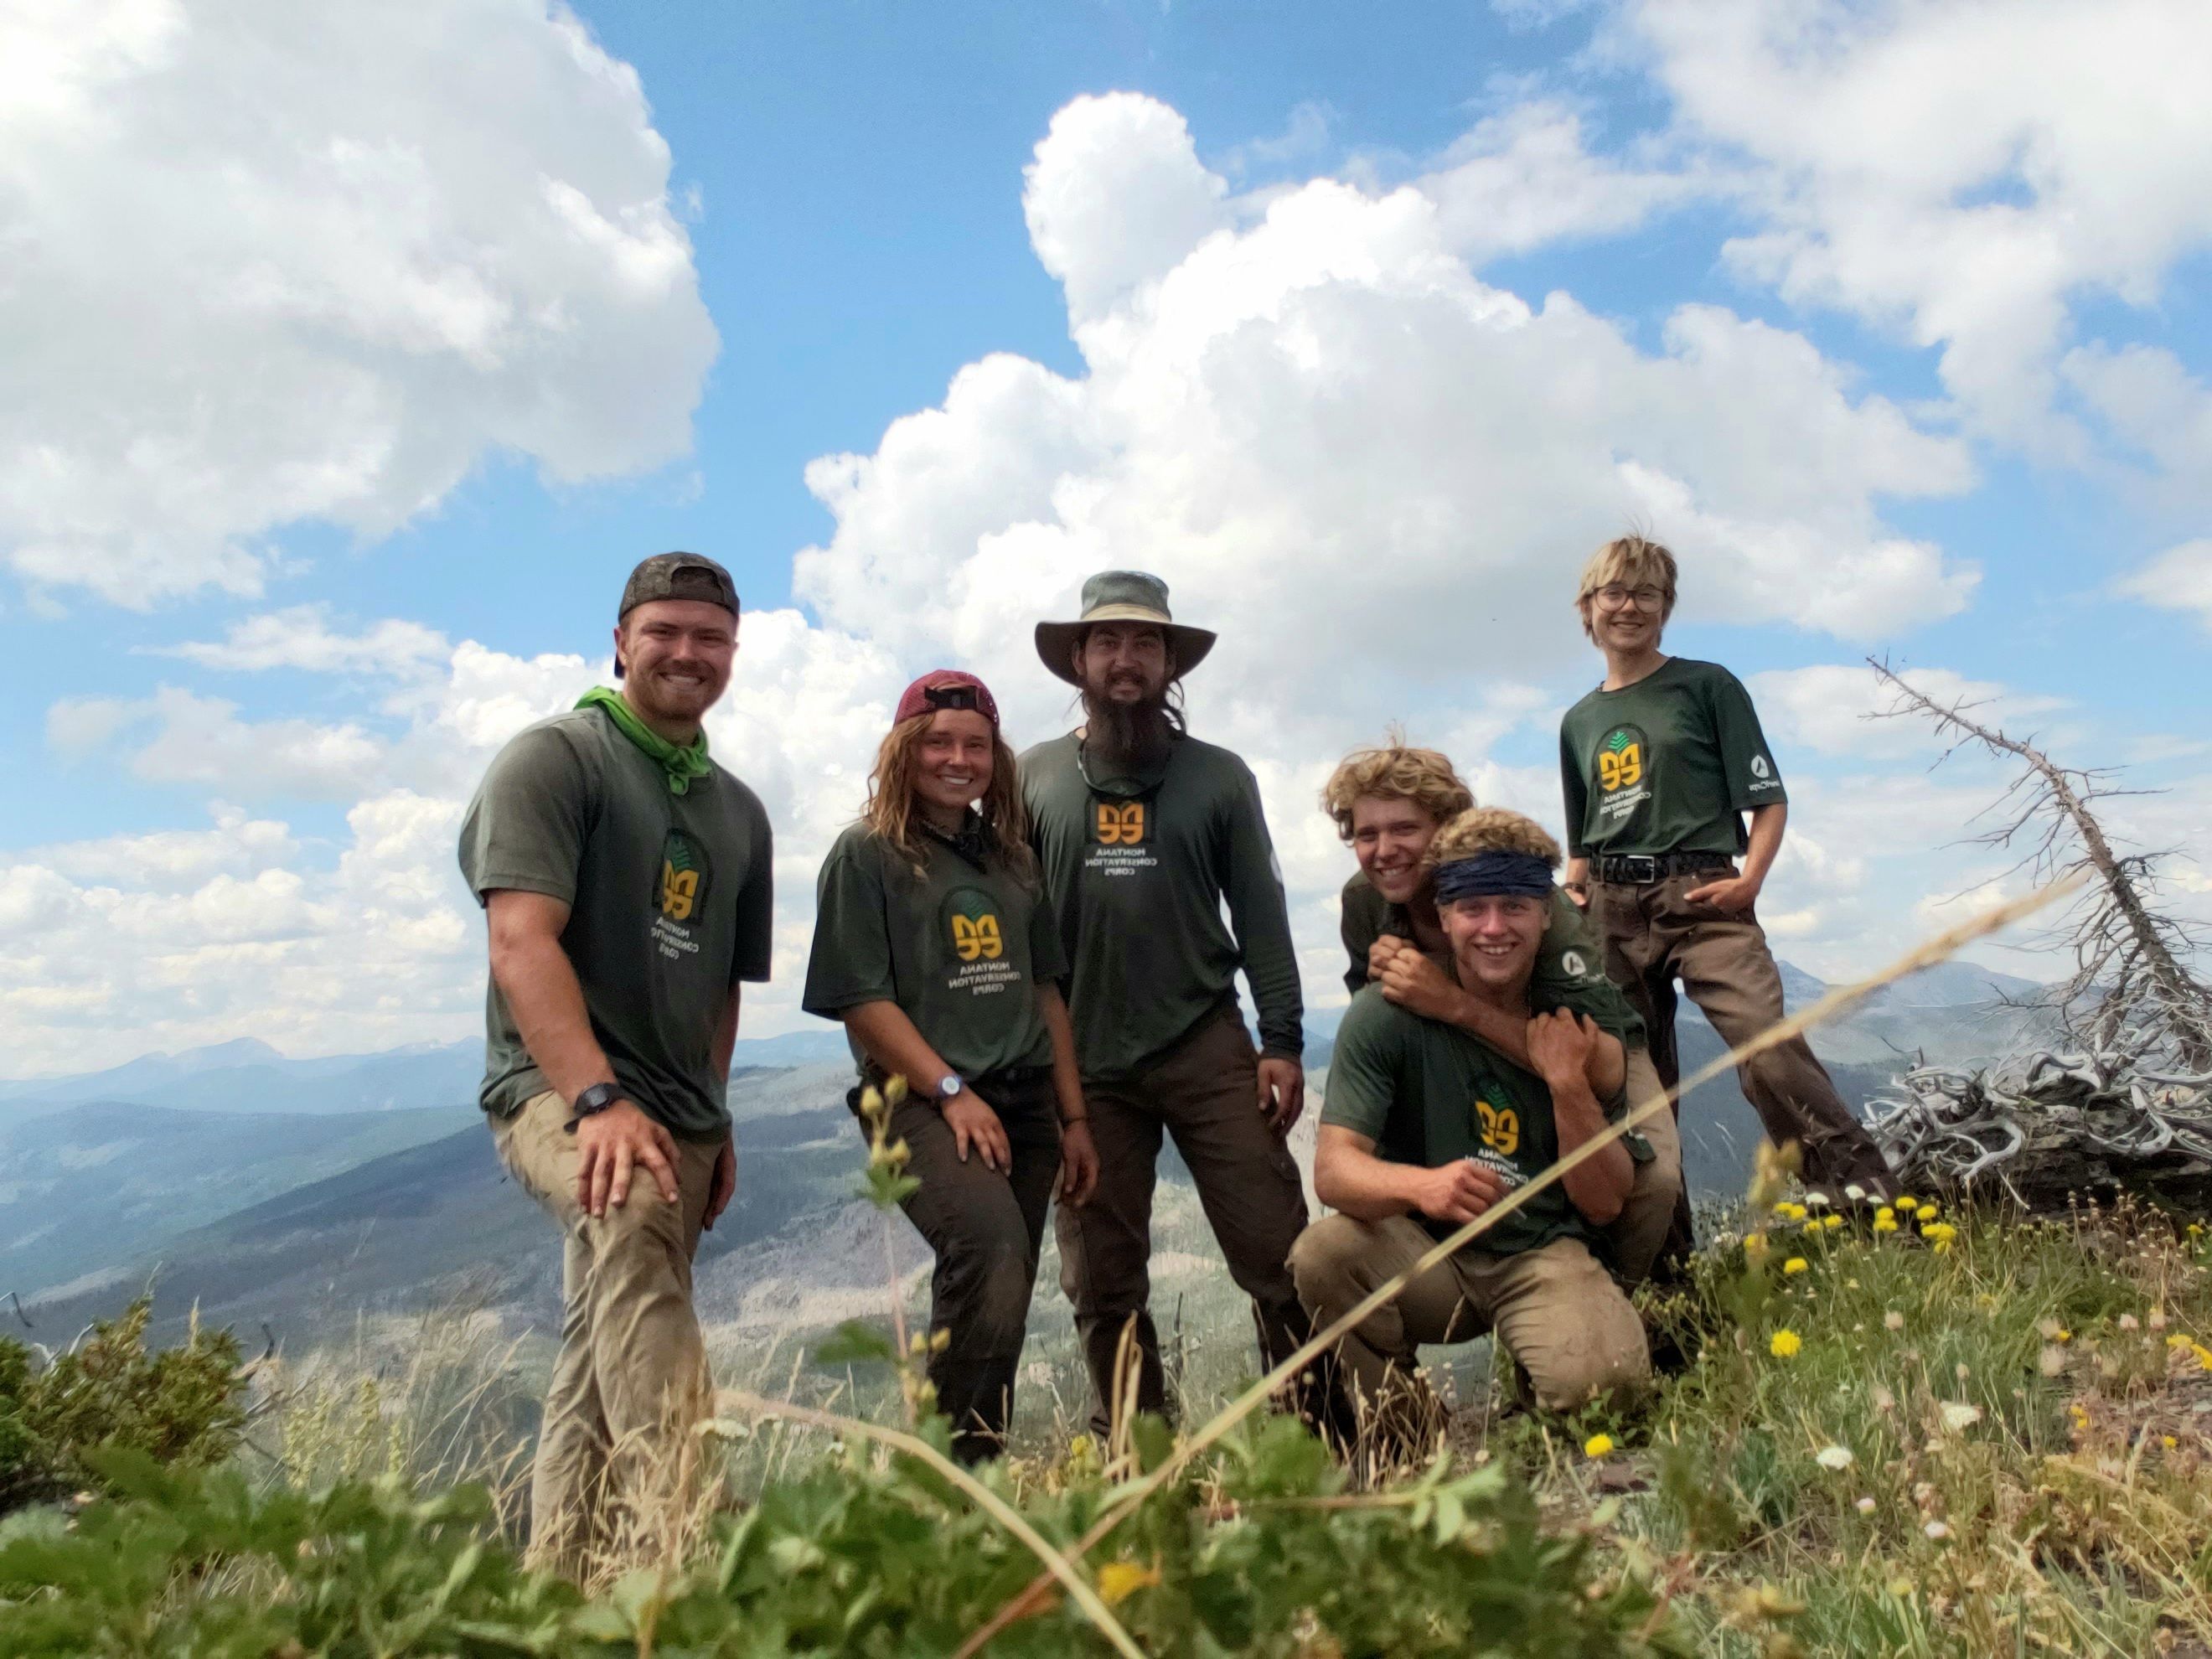 A happy crew stands on a mountain summit. There are wildflowers and grass in the foreground and a blue sky in the background.